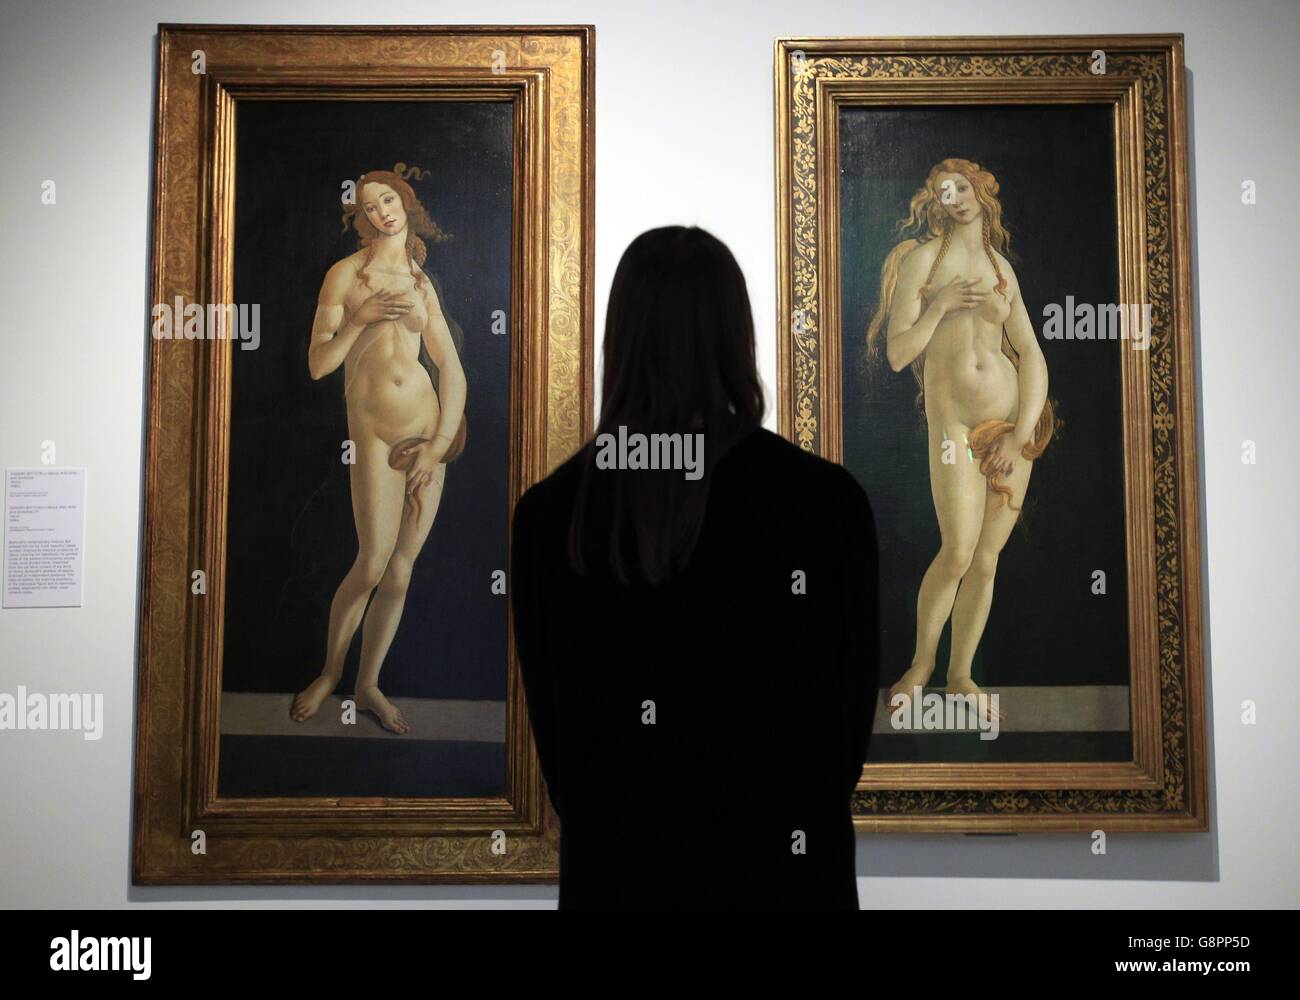 A visitor looks at two separate depictions of the goddess Venus by Sandro Botticelli on display as part of the 'Botticelli Reimagined' exhibition at the V&A Museum, London. Stock Photo